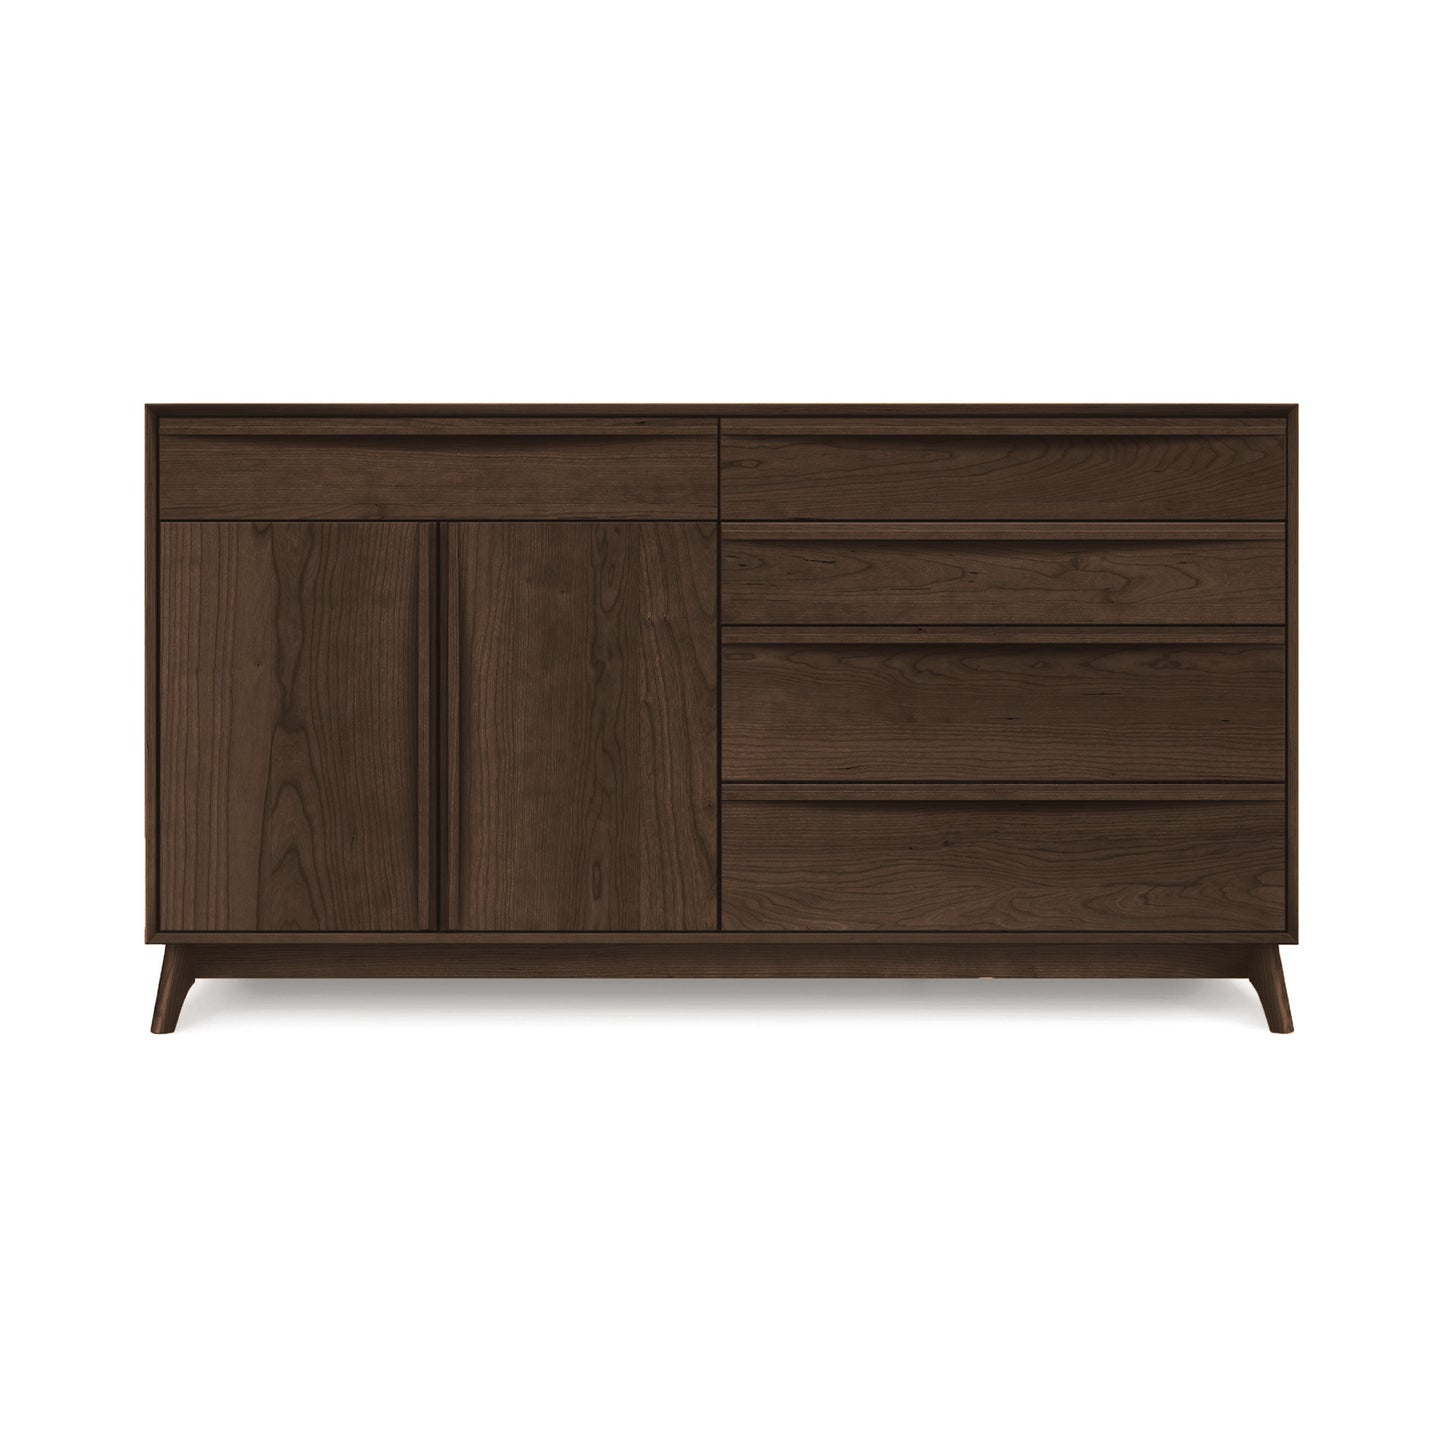 A Mid-Century Modern Copeland Furniture Catalina 5-Drawer, 2-Door Buffet with closed drawers and panel doors on angled legs.